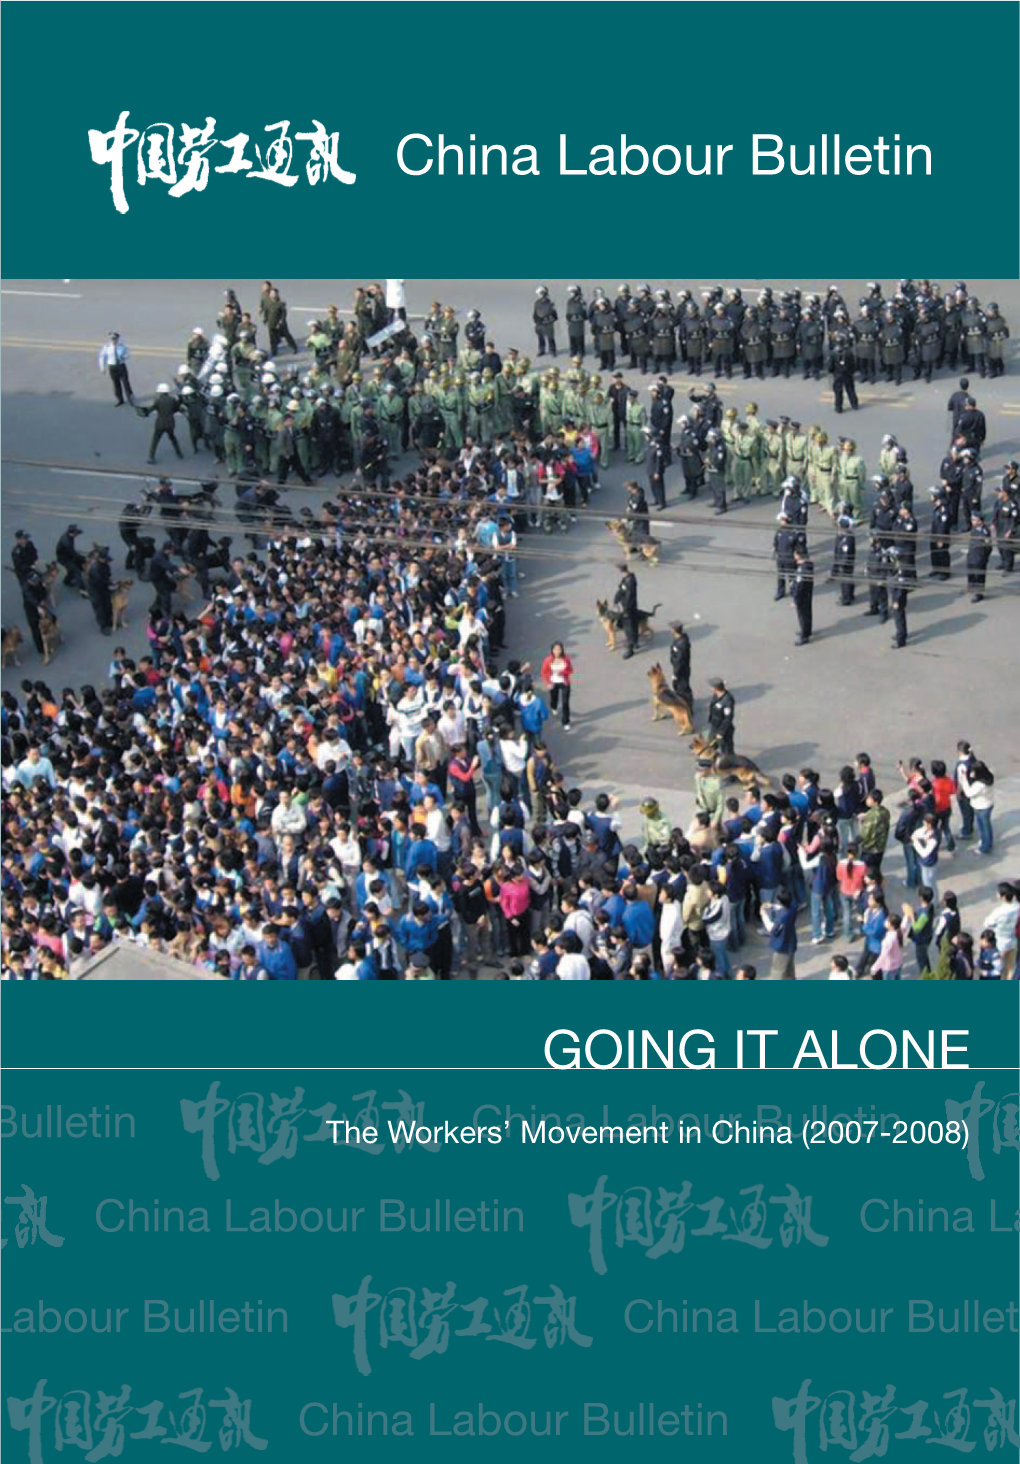 The Workers' Movement in China (2007-2008)